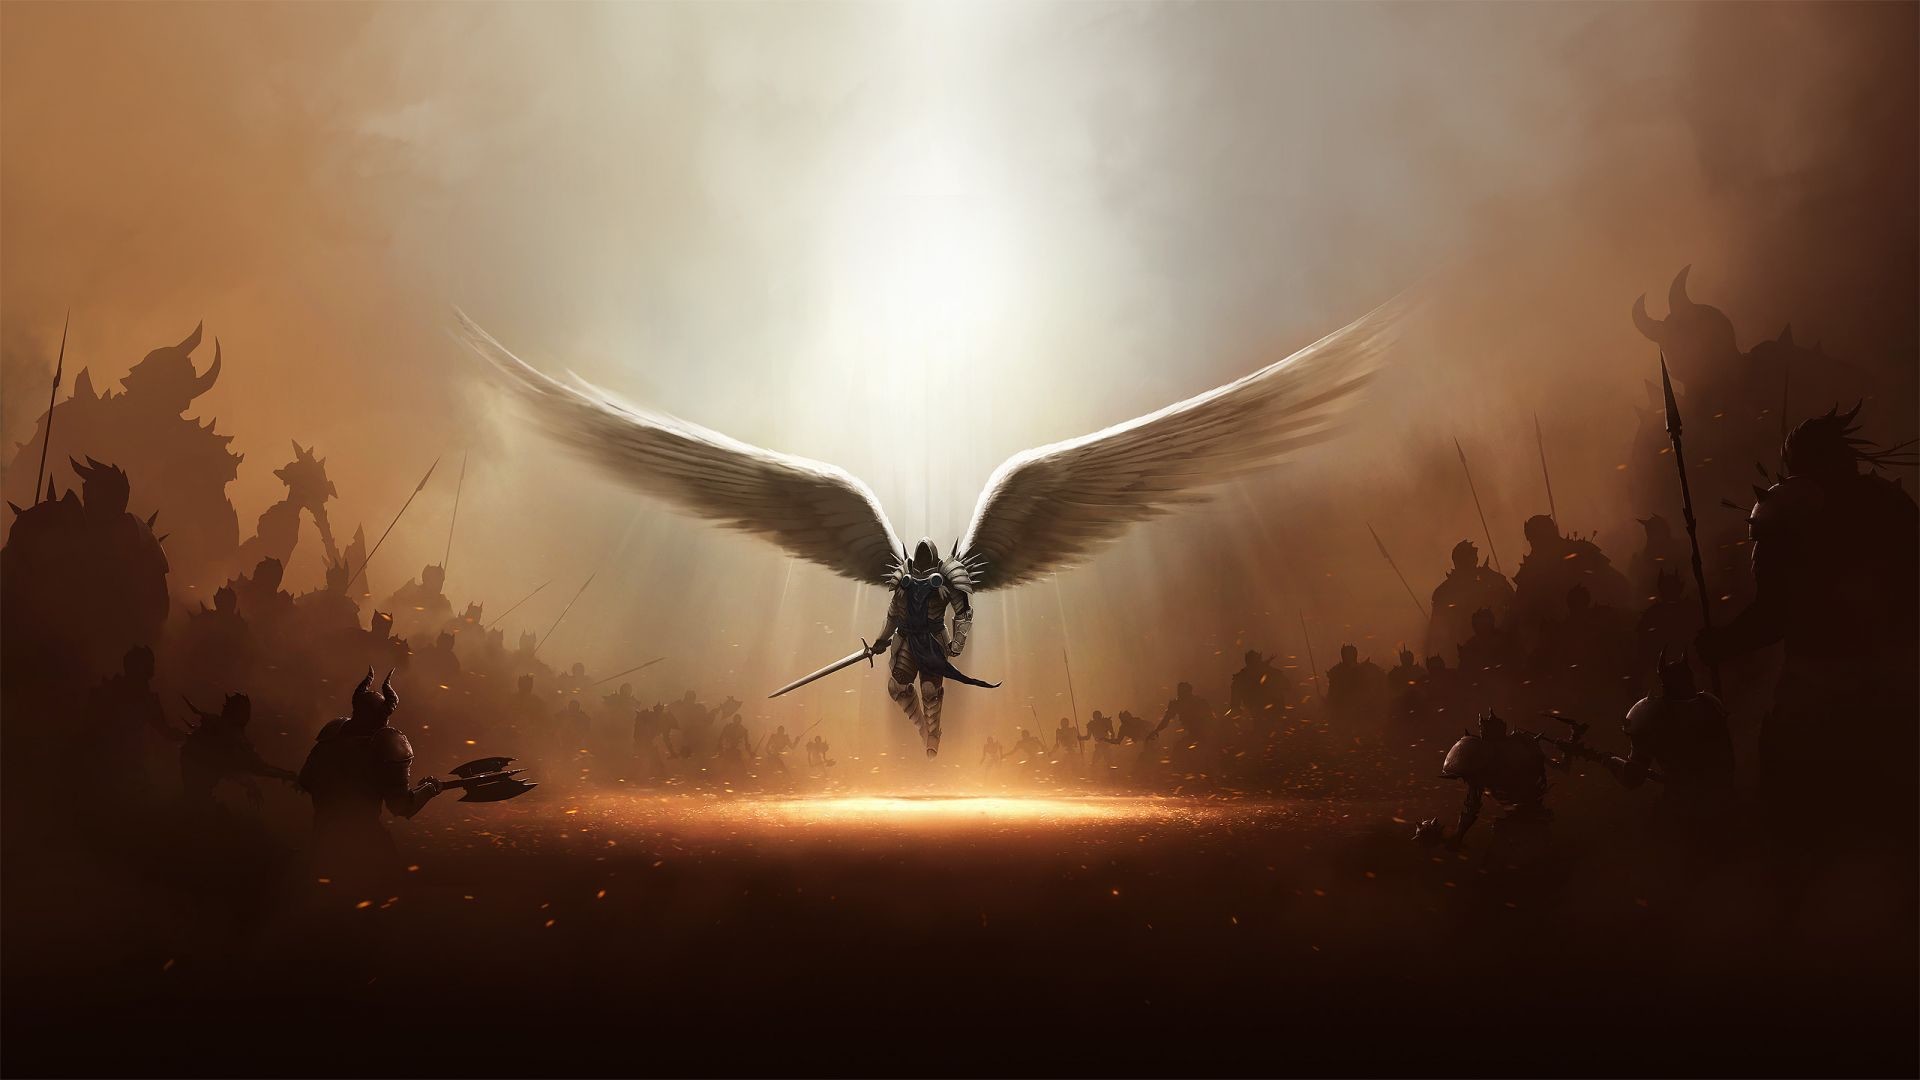 1920x1080 Collection of Animated Angel Wallpaper on HDWallpapers 1920Ã1080 Angel  Wallpaper (54 Wallpapers)